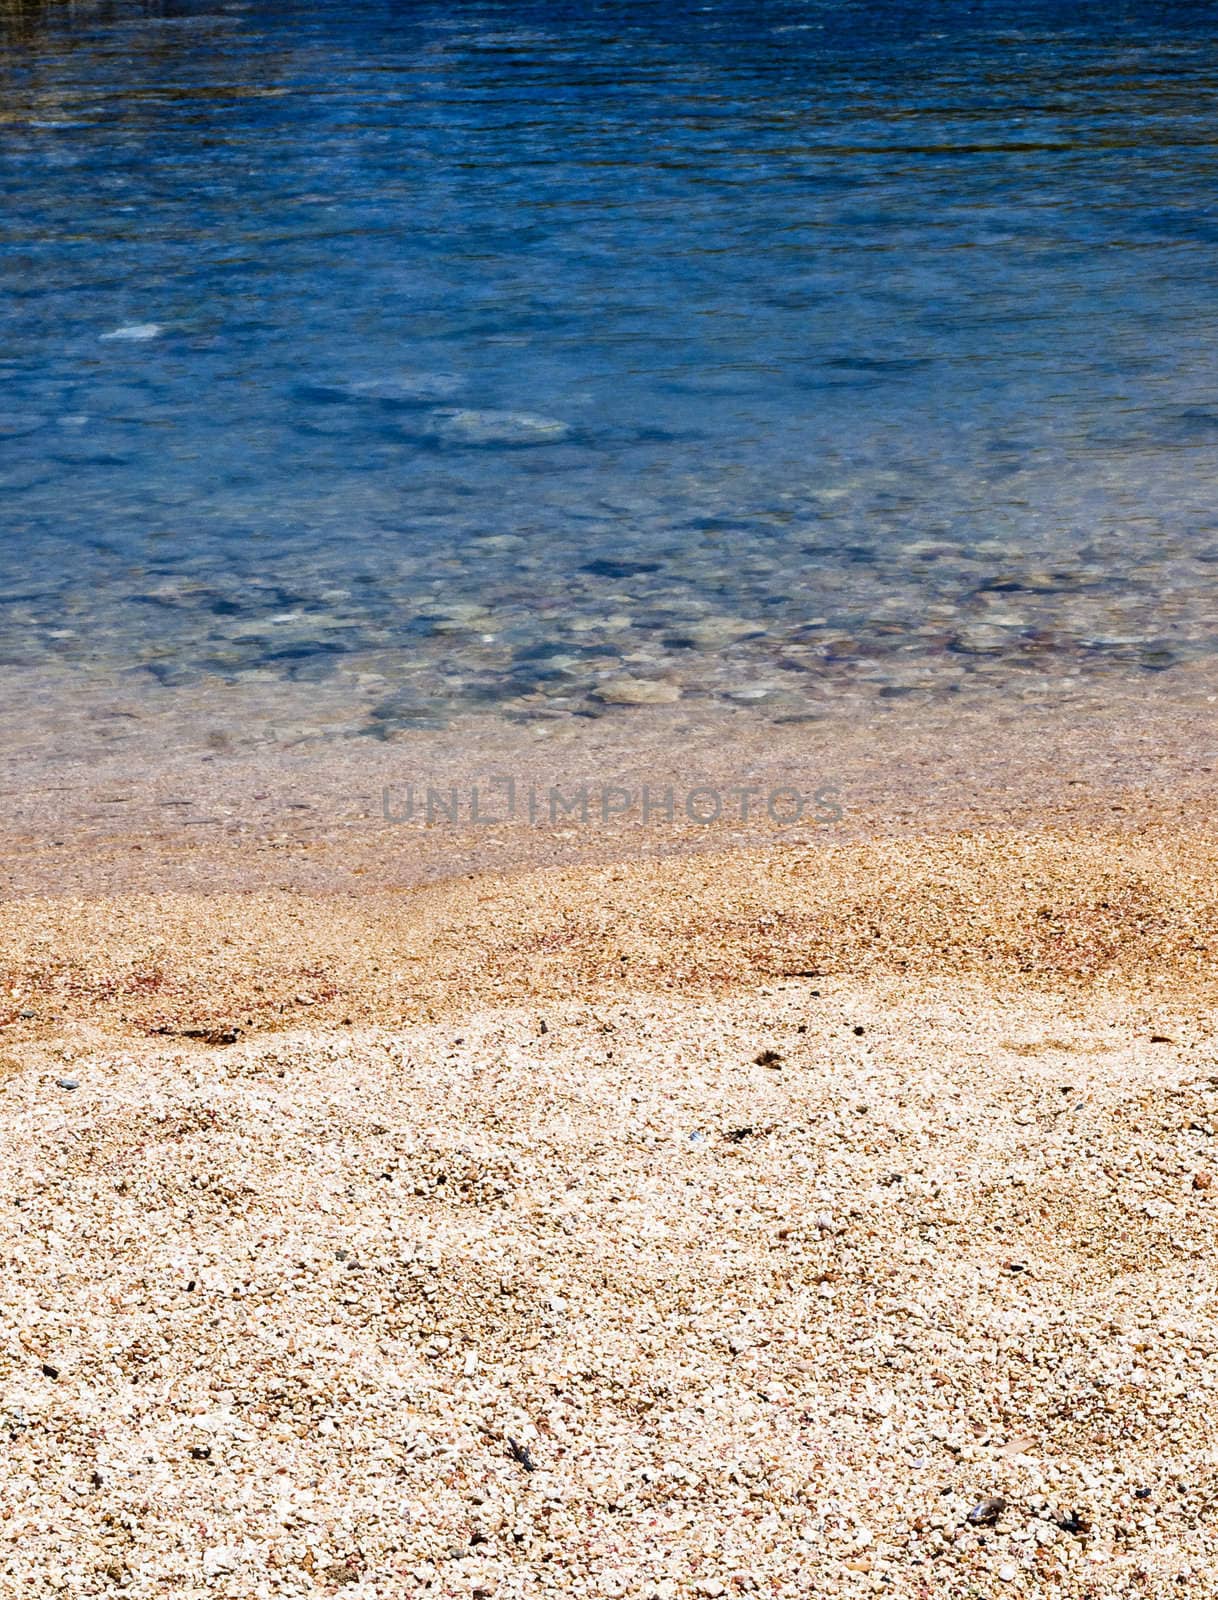 Detail of the waters edge on a tropical beach reef